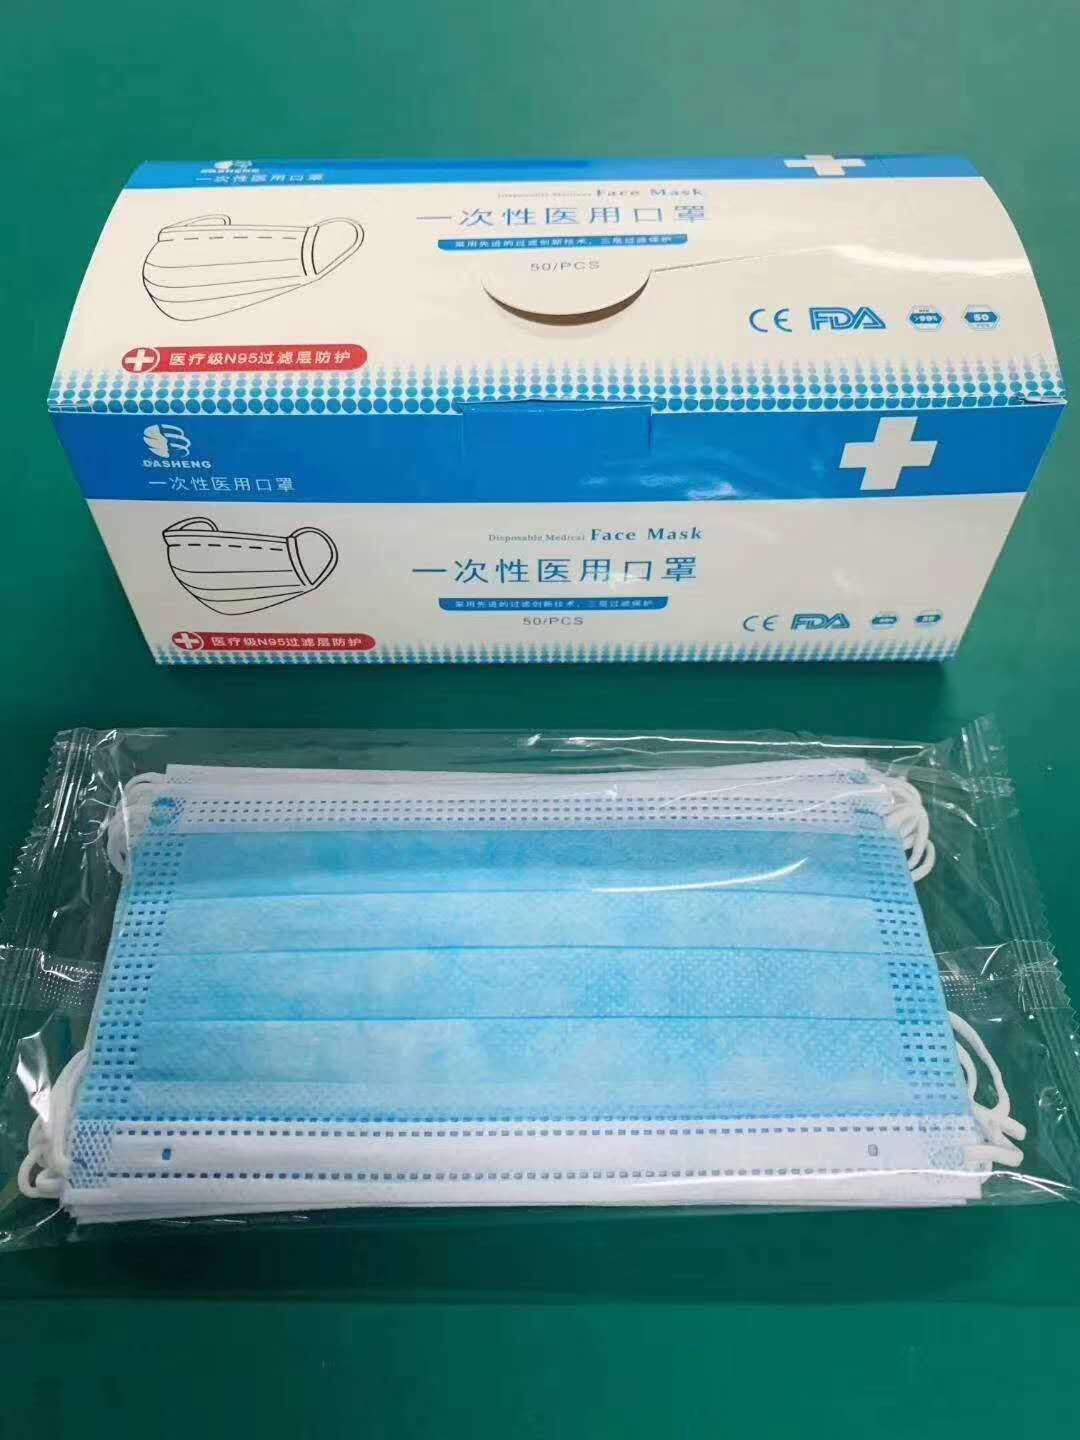 Discount Price Filter Casing Pipe Screen Making Machine -
 Blue Surgical Medical Procedure 3 ply Earloop Disposable Face Mask for Sale – Jiutu